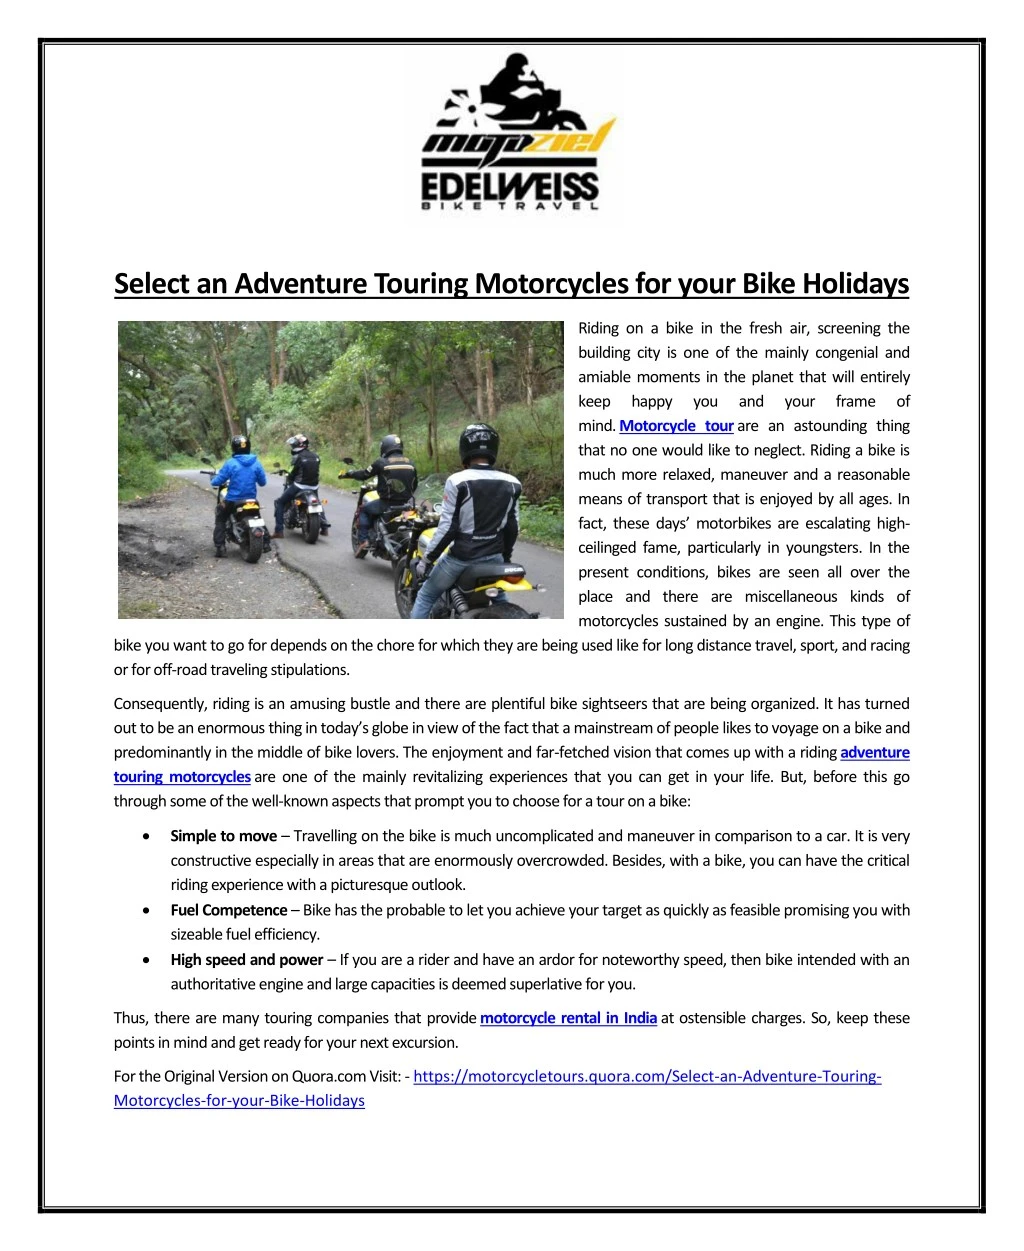 select an adventure touring motorcycles for your